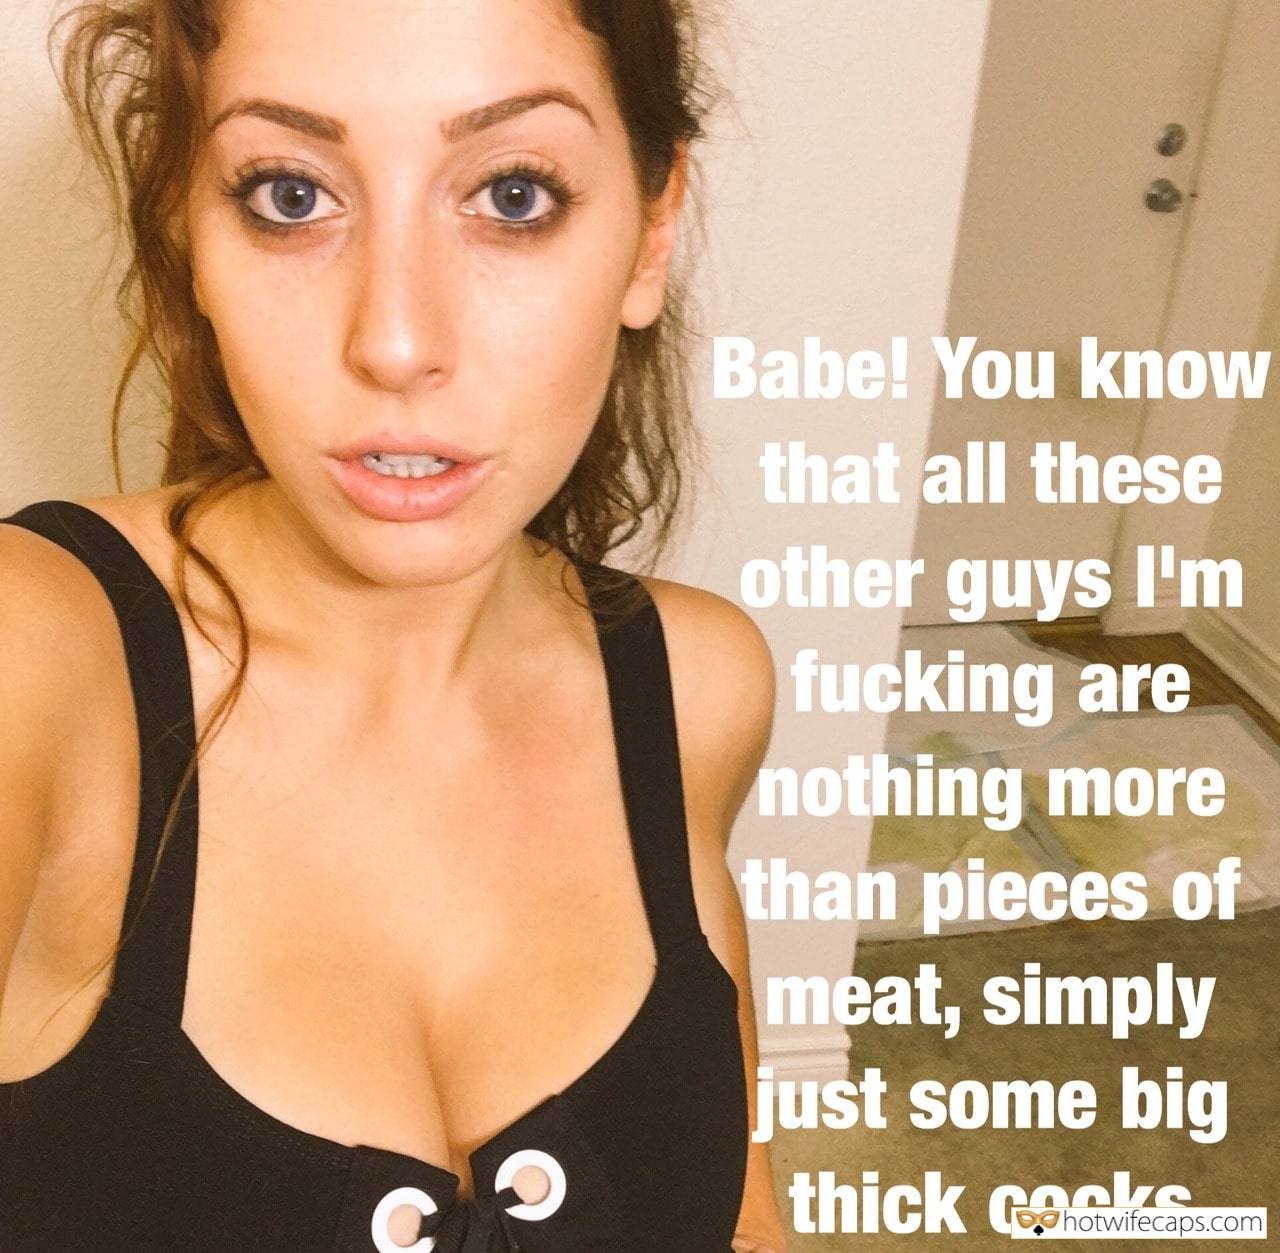 Sexy Memes hotwife caption: Babe! You know that all these other guys I’m fucking are nothing more than pieces of meat, simply just some big thick cocks She Is Still Hungry for Dicks